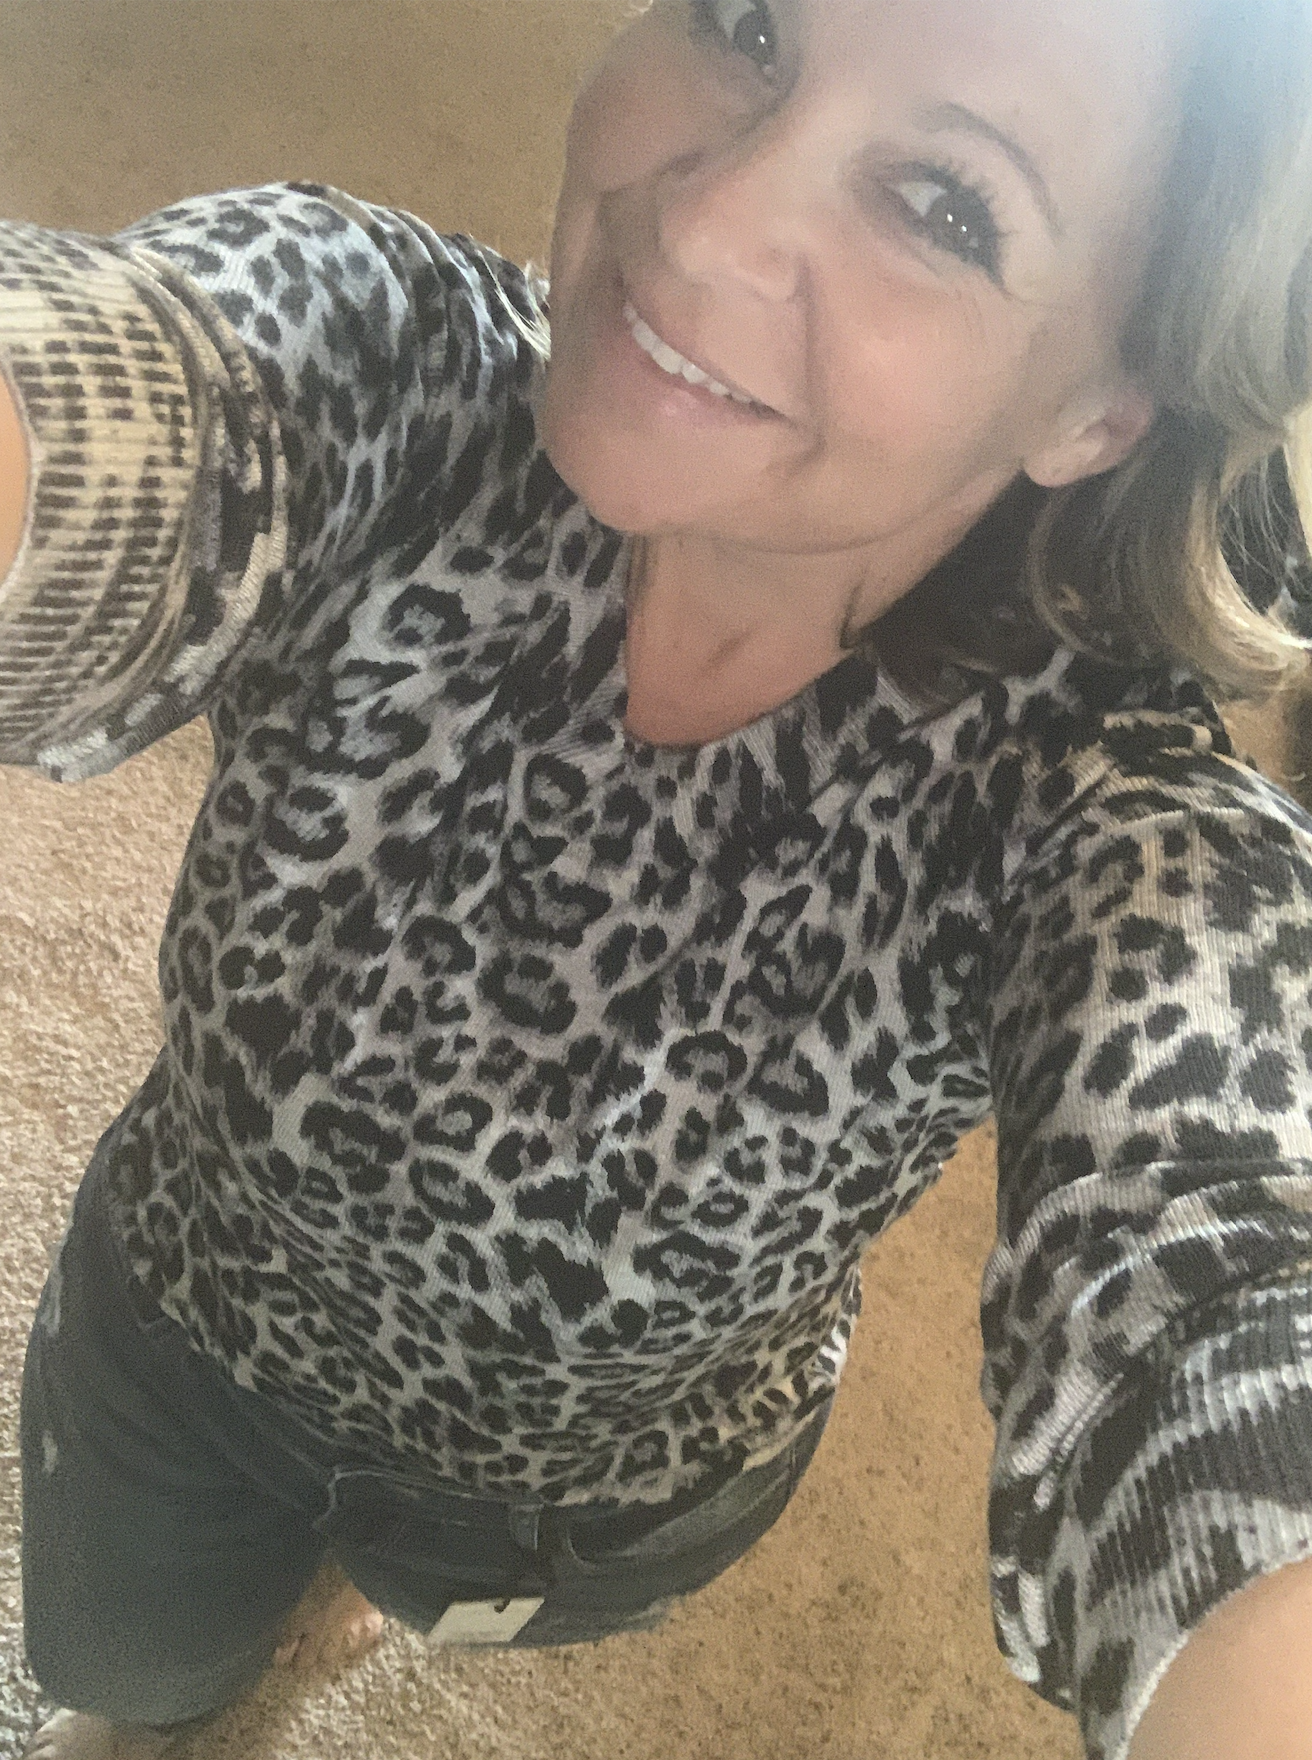 Ready for Fall in Judy Blue Jeans and Leopard Sweater from Stitch Fix